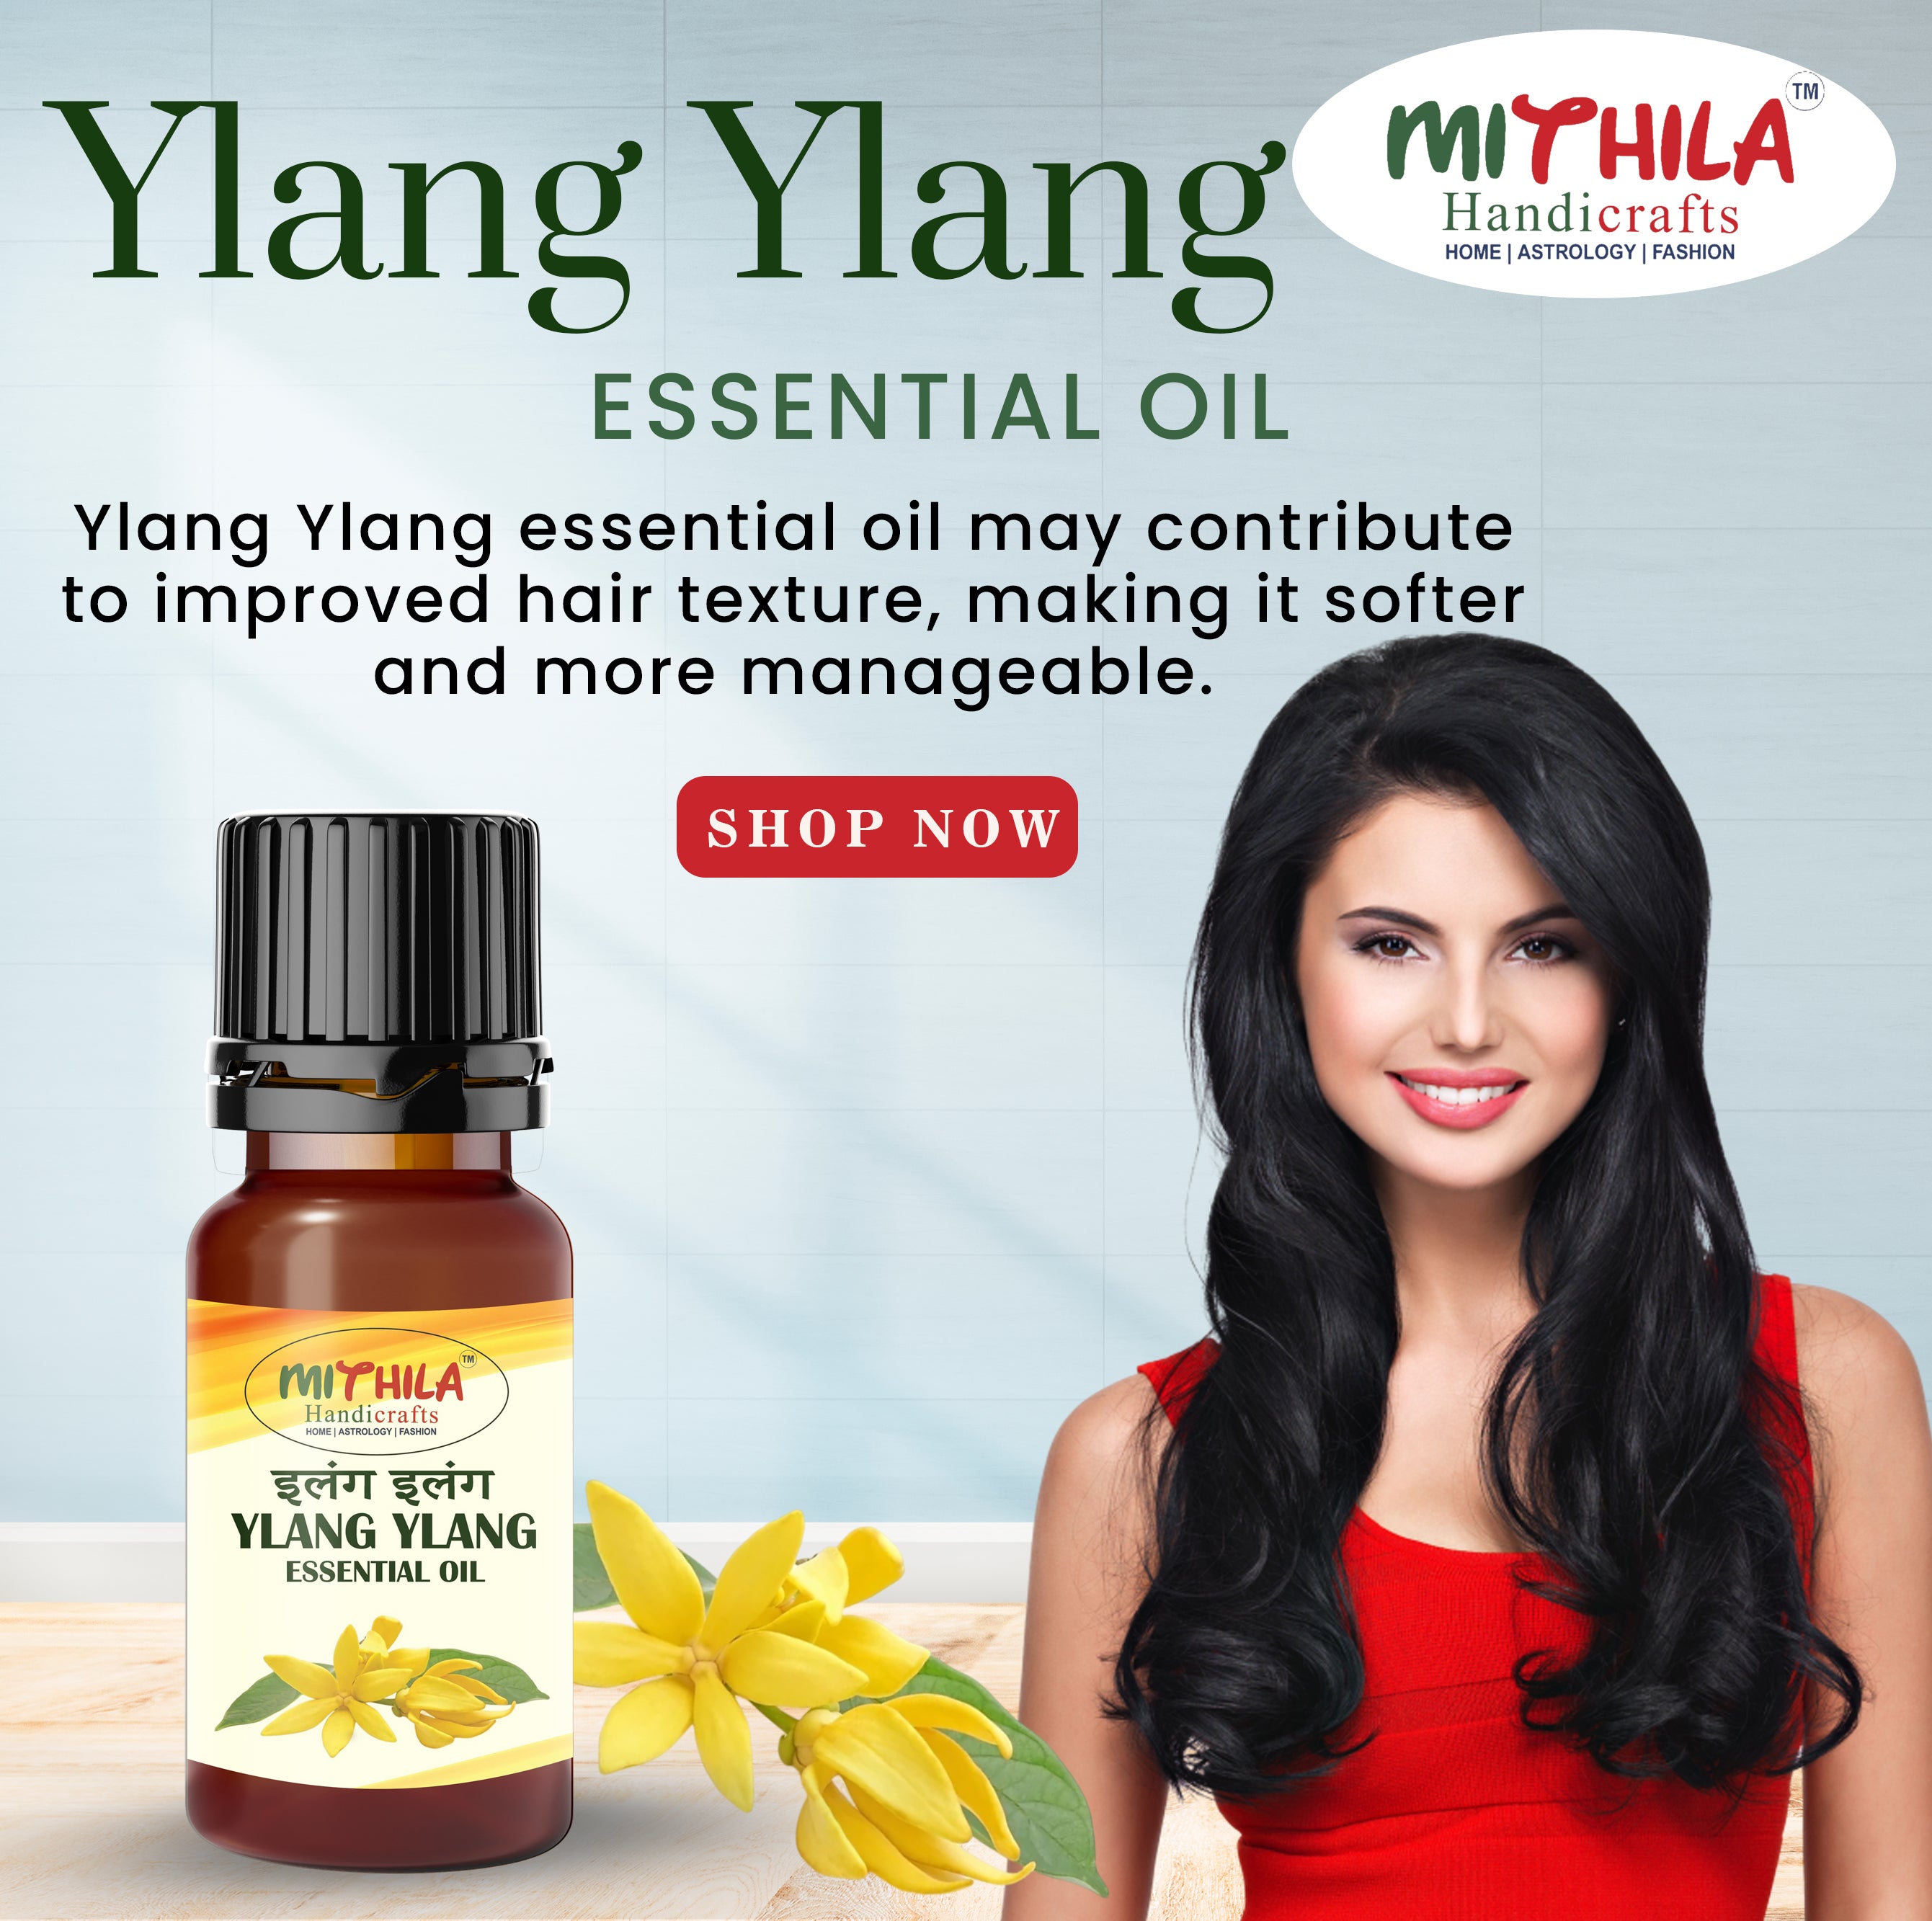 Ylang Ylnag Essential Oil For Skin, Hair Care, Home Fragrance, Aroma Therapy 30ml